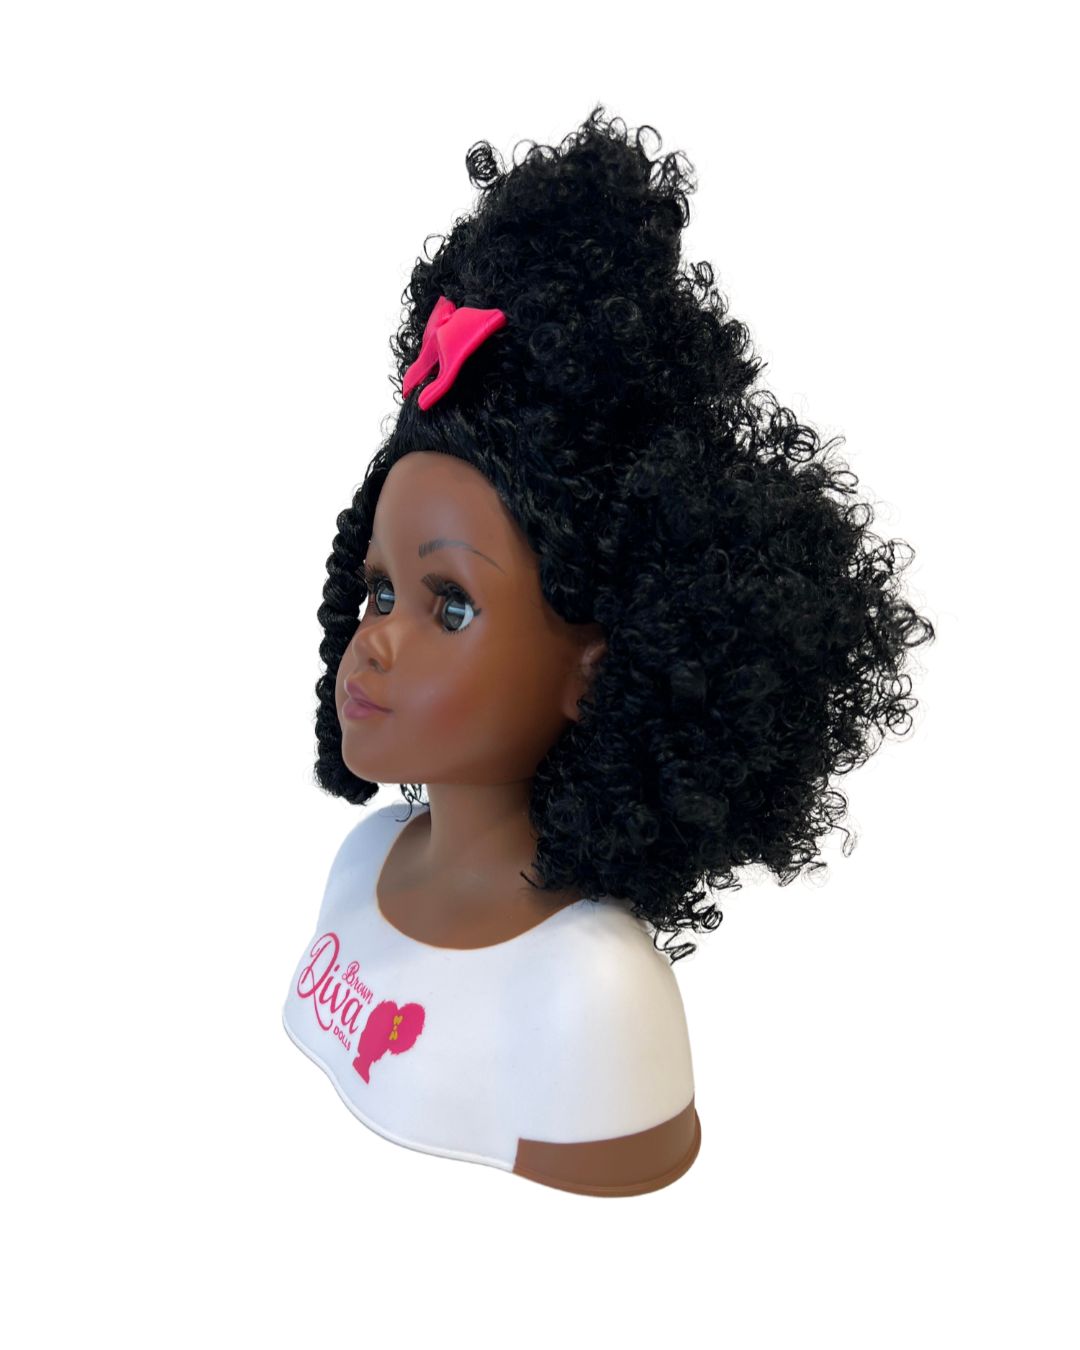 Diva Head Curly Afro